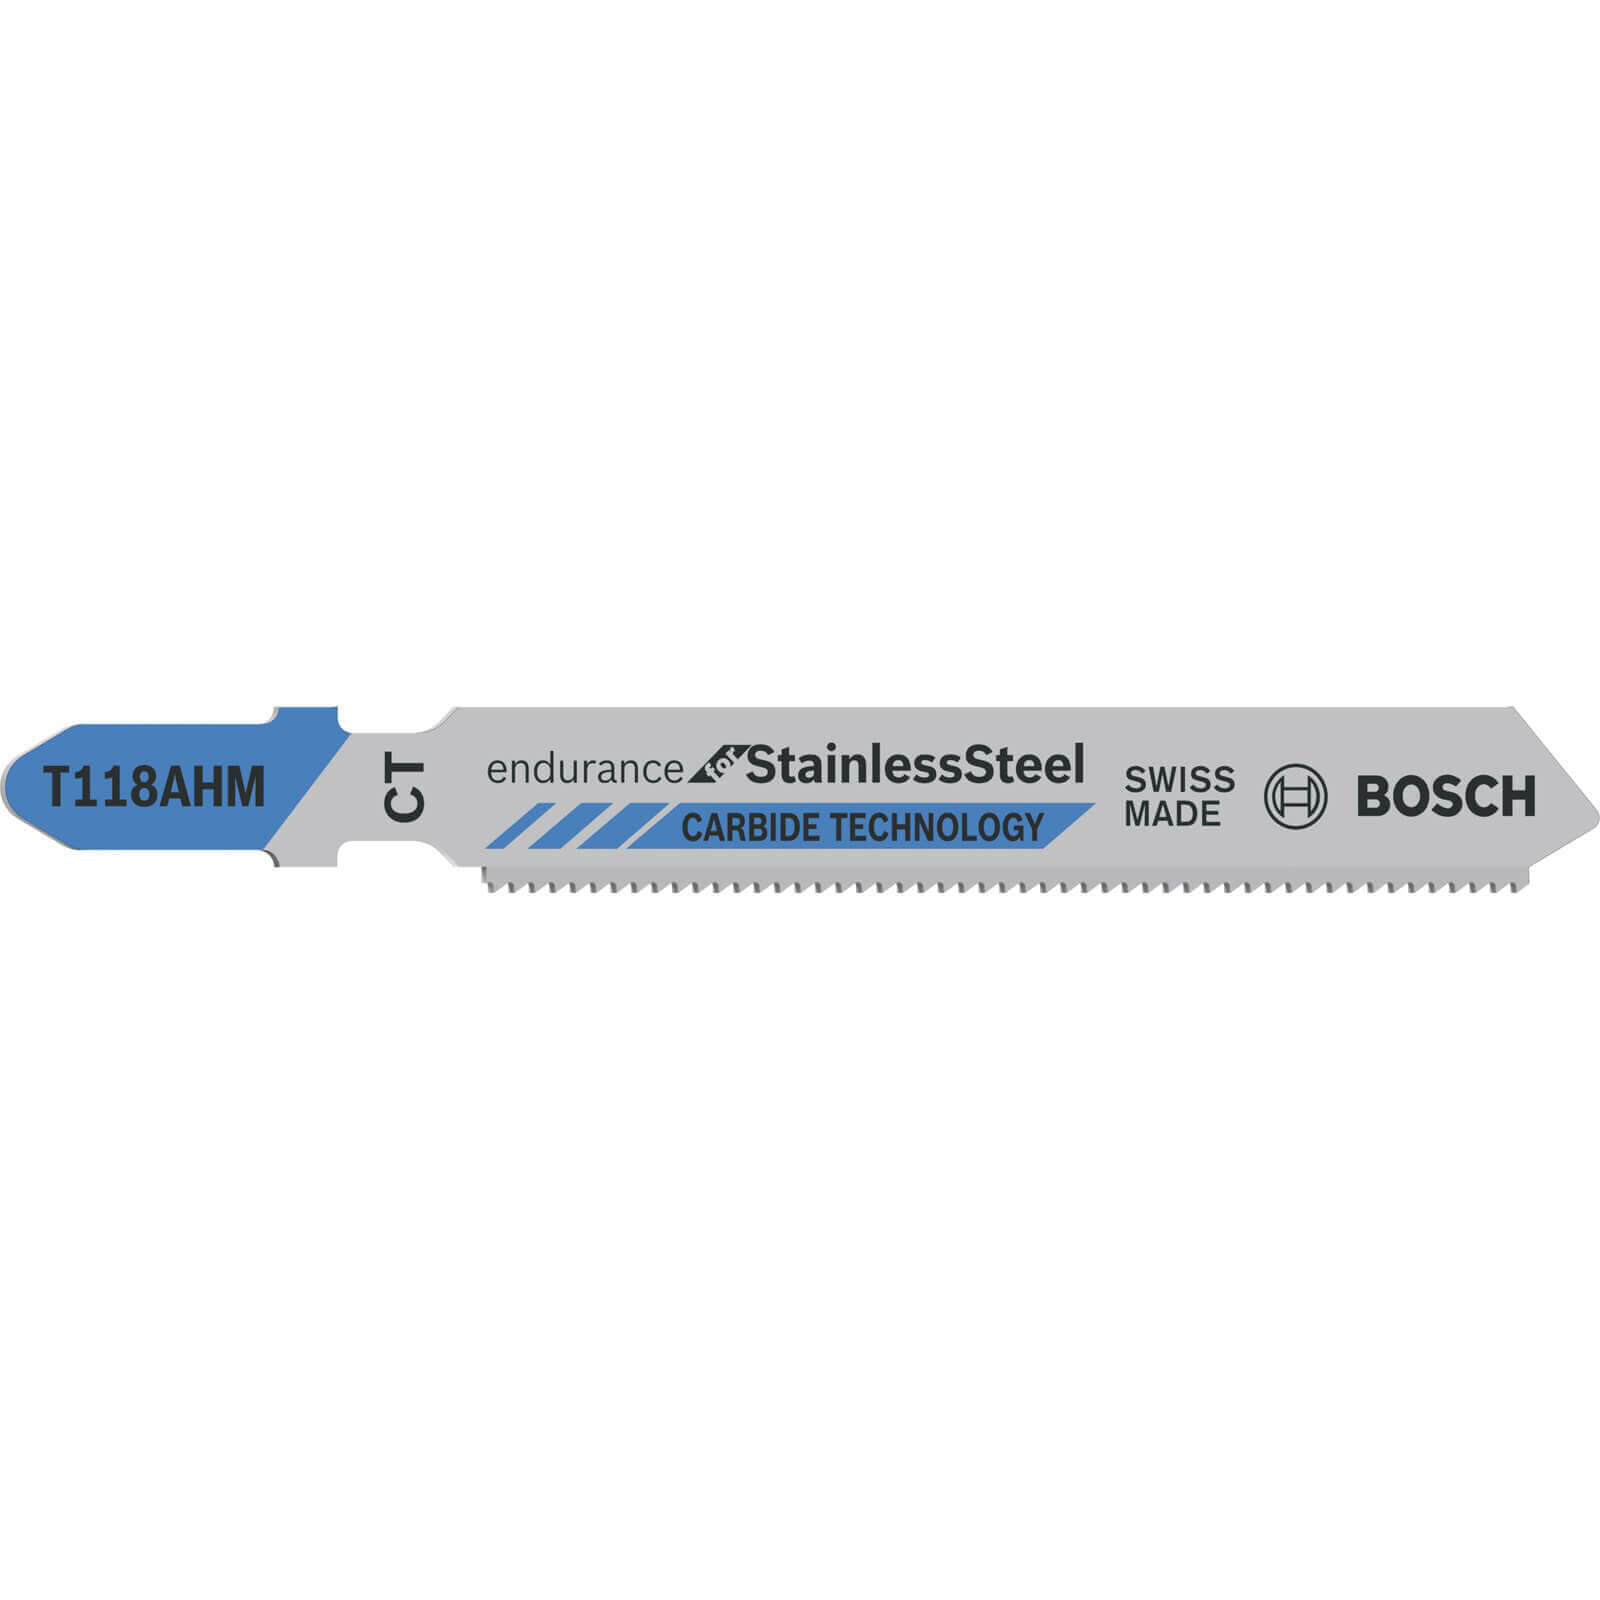 Photo of Bosch T118 Ahm Stainless Steel Cutting Jigsaw Blades Pack Of 3